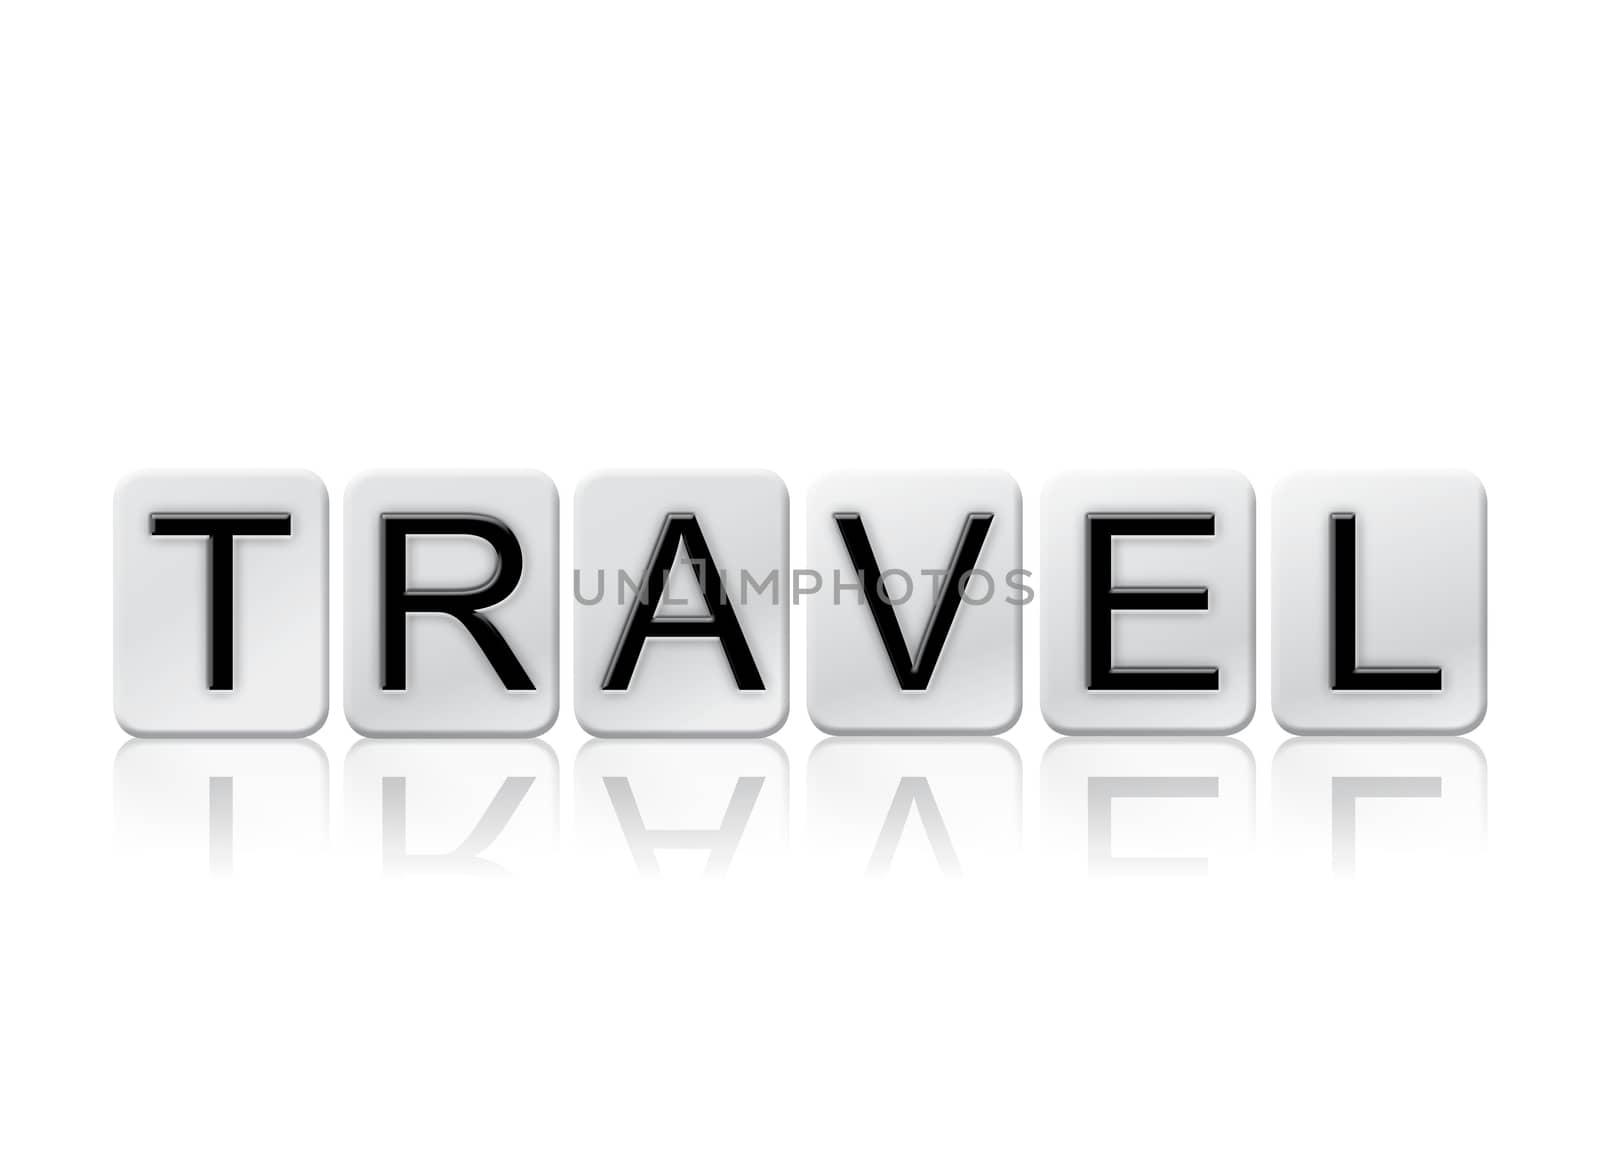 The word "Travel" written in tile letters isolated on a white background.